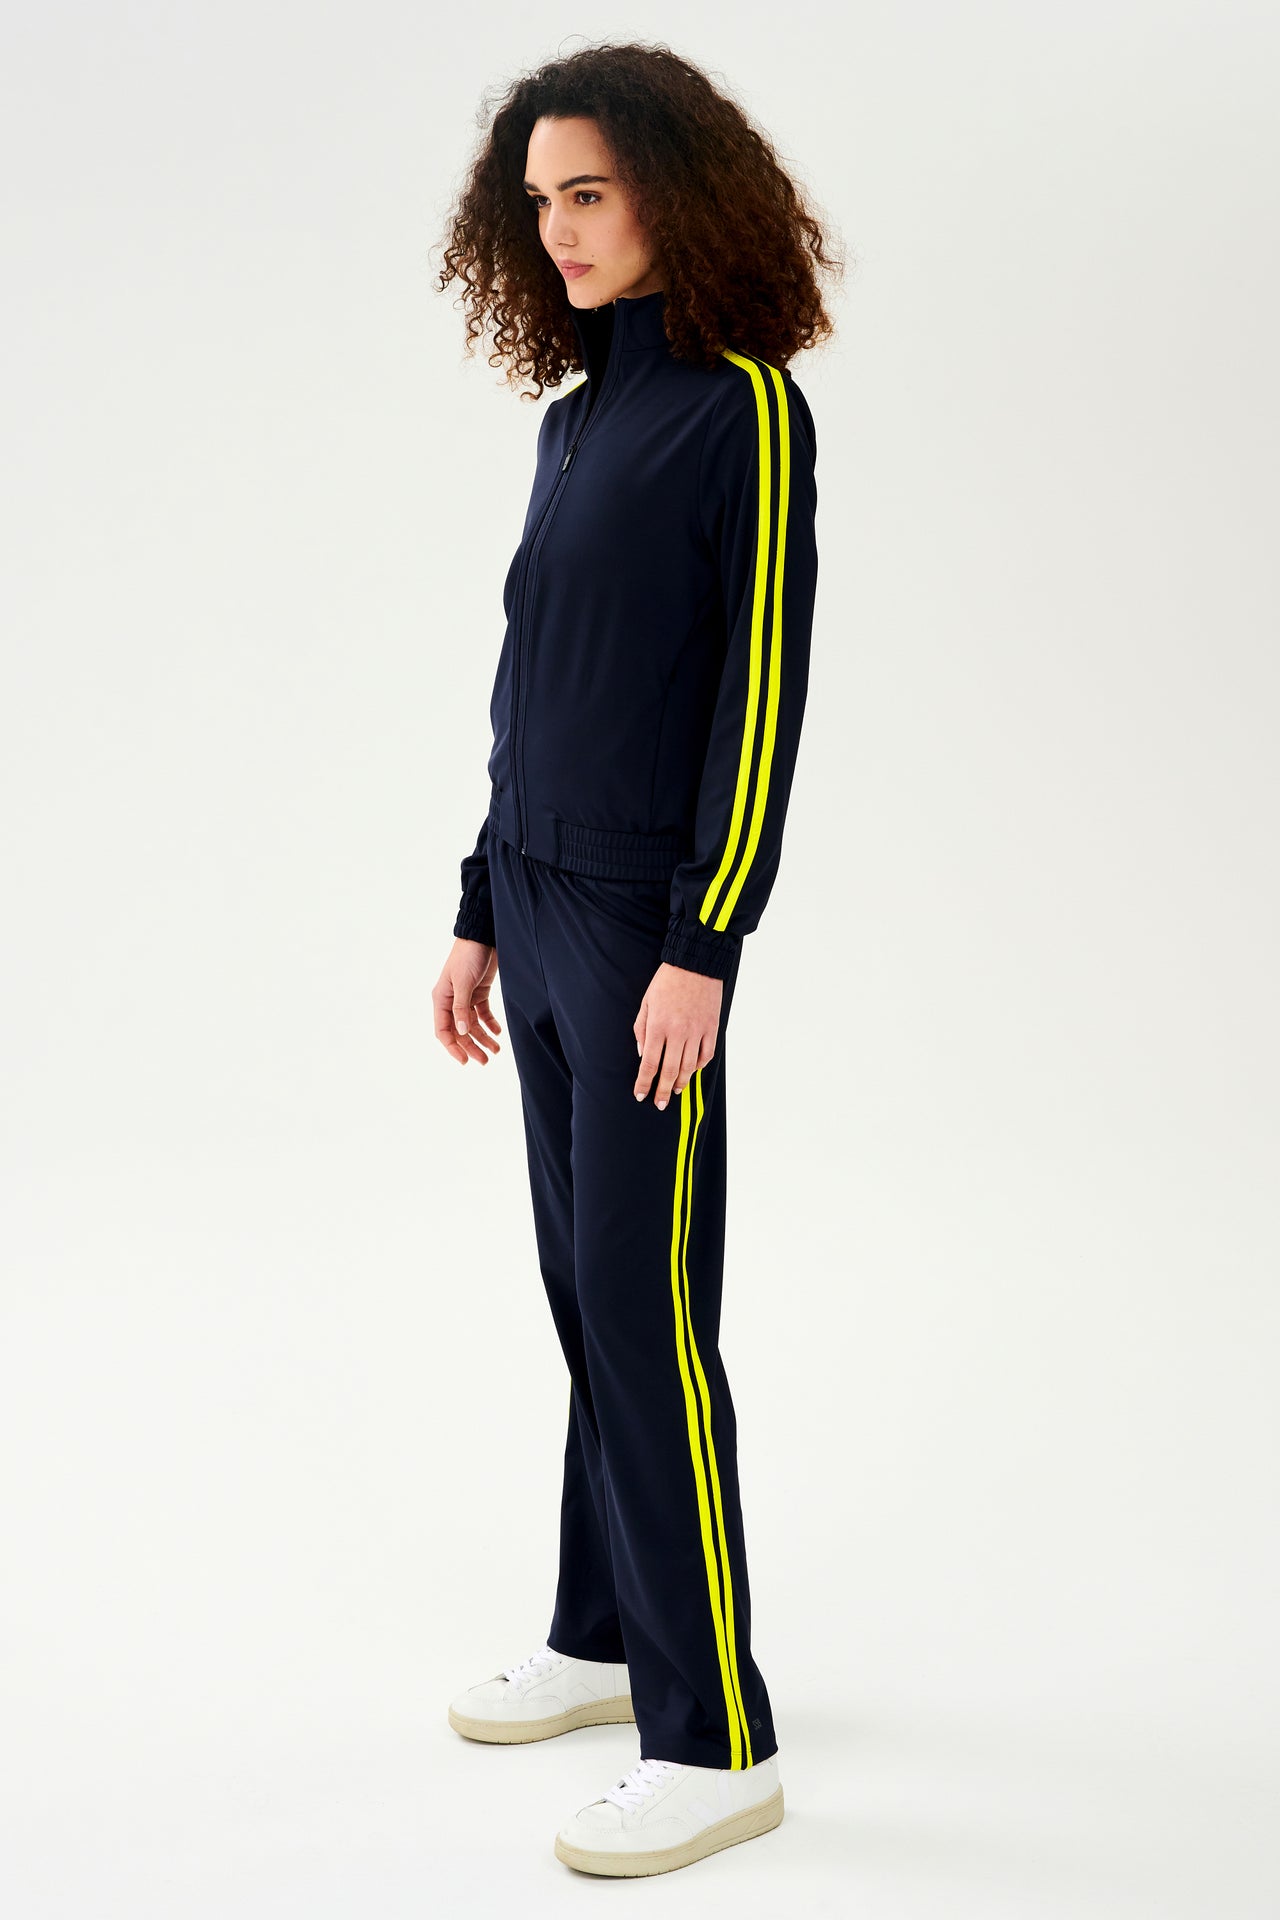 A woman wearing a luxurious SPLITS59 Fox Techflex Jacket in Indigo/Chartreuse with yellow side stripes, perfect as an après workout piece.